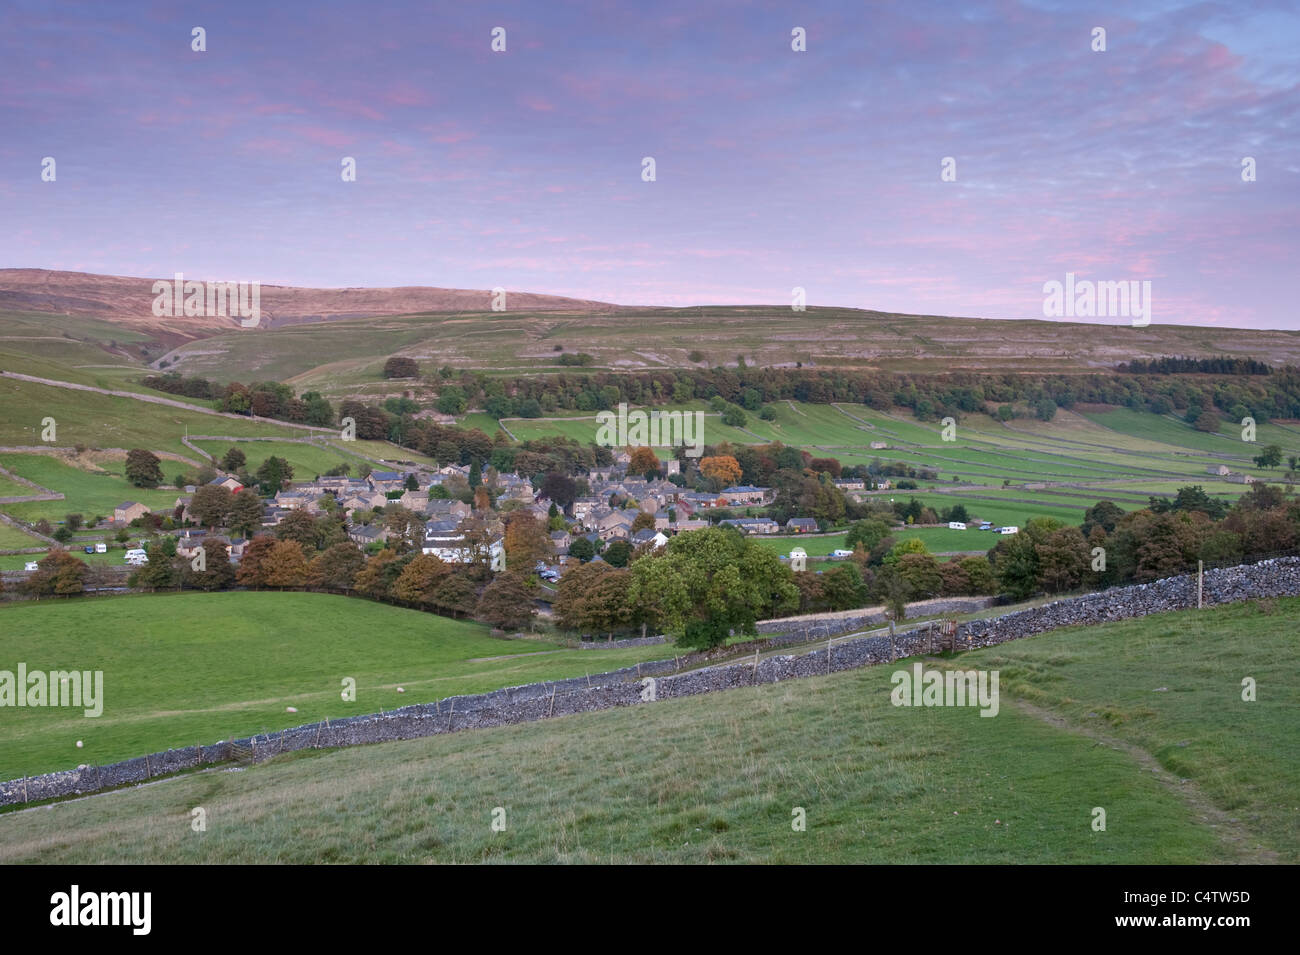 Kettlewell village, nestling in scenic rural valley below upland hills & moors & pink evening sunset sky - Wharfedale, Yorkshire Dales, England, UK. Stock Photo